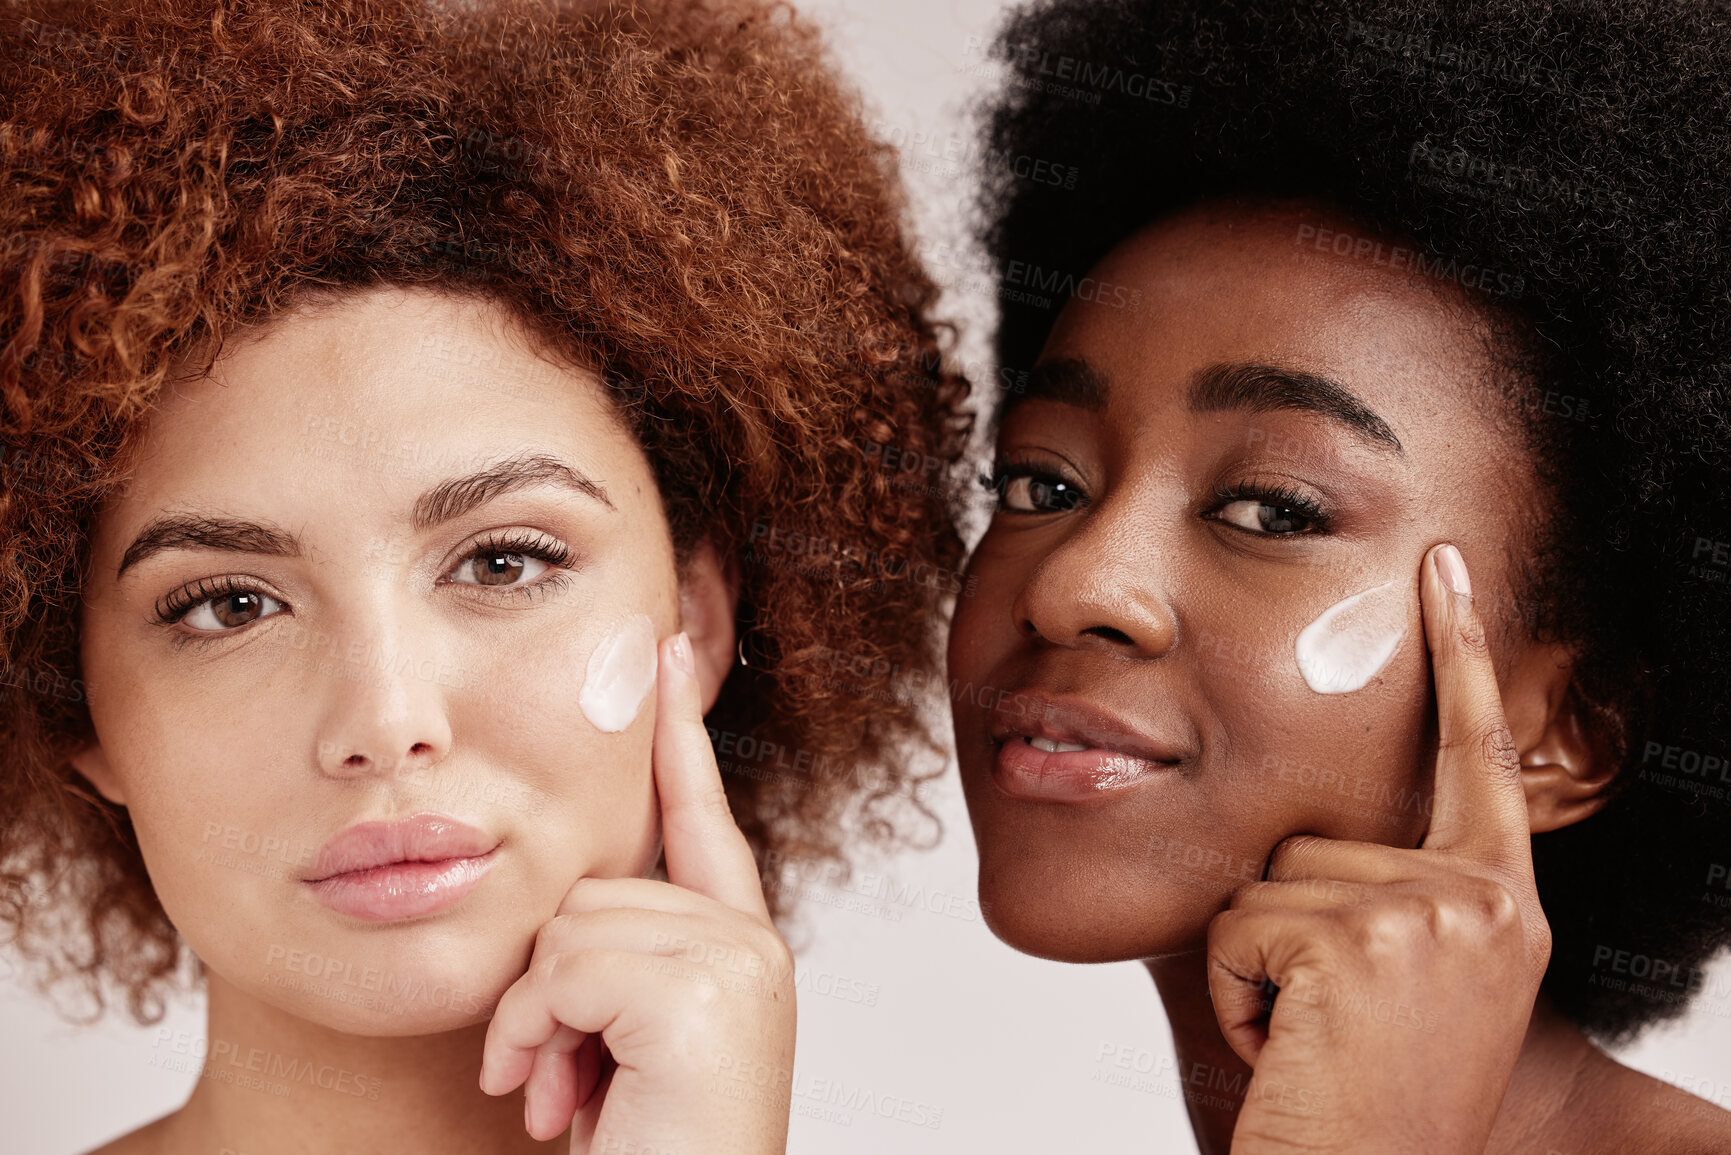 Buy stock photo Skincare, face cream and portrait of women in a studio for a wellness, health and natural routine. Beauty, cosmetic and interracial females with facial moisturizer, spf or lotion by nude background.